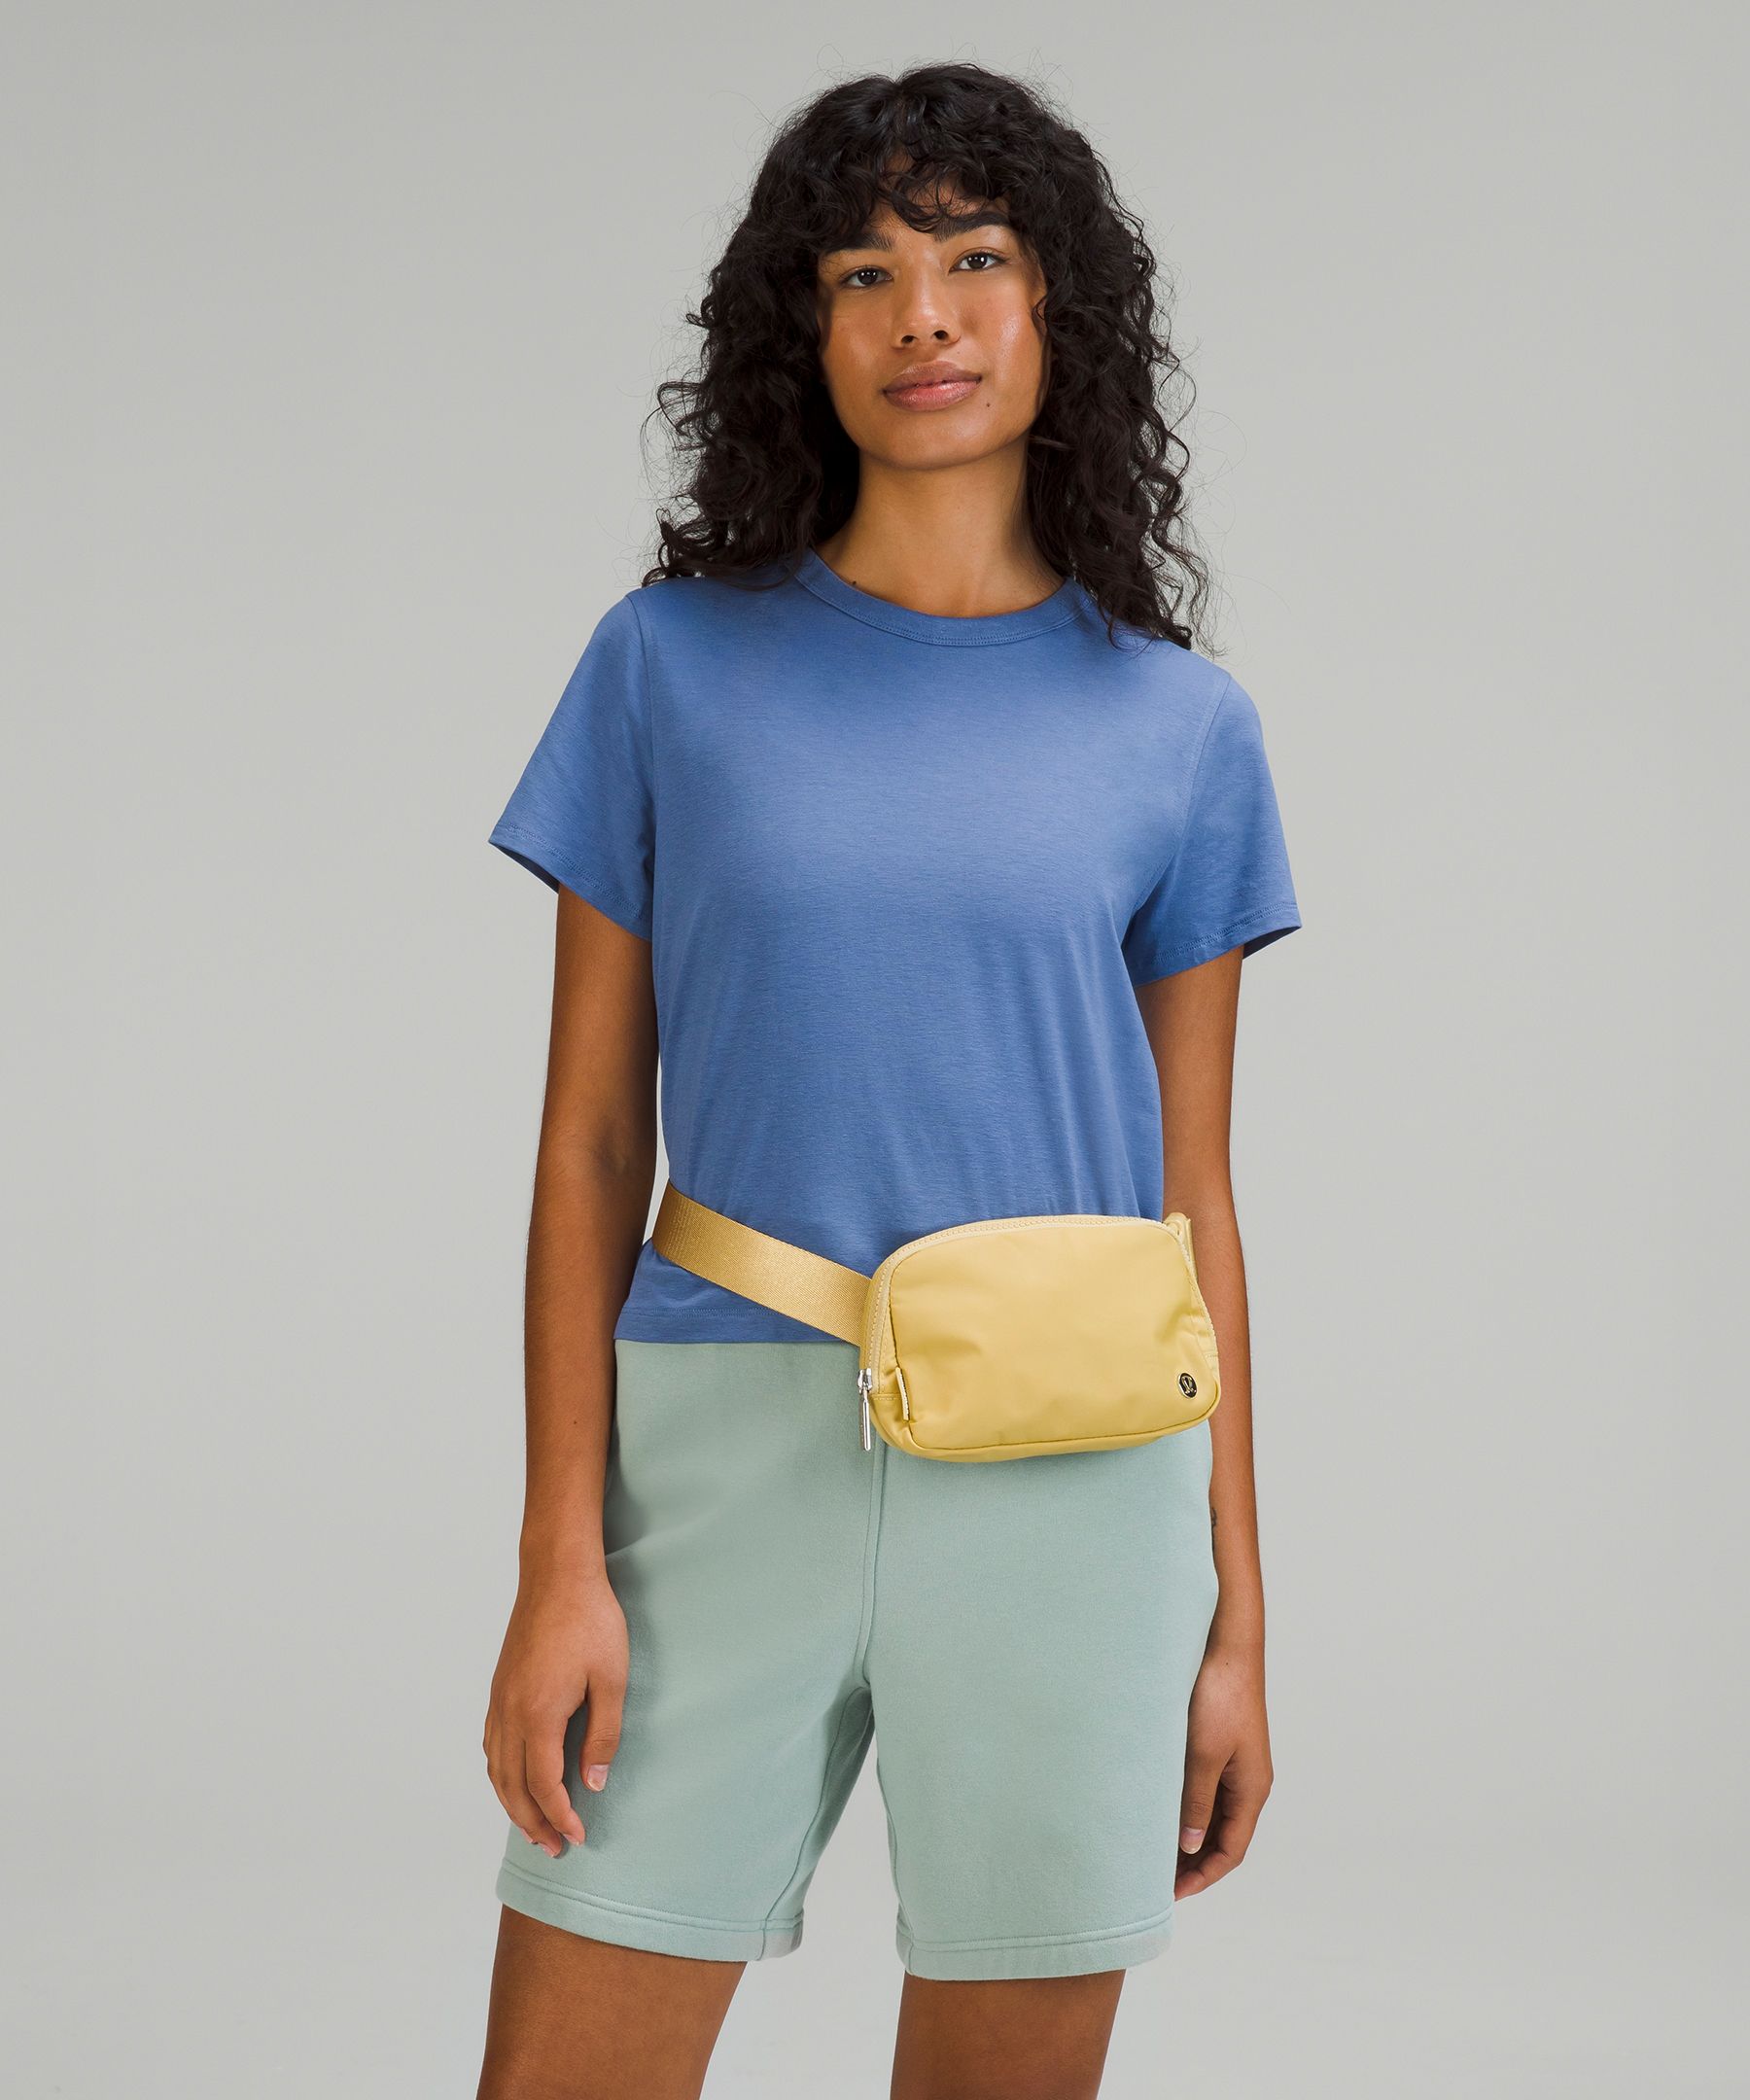 HTF lululemon Pack and go backpack with Fanny pack